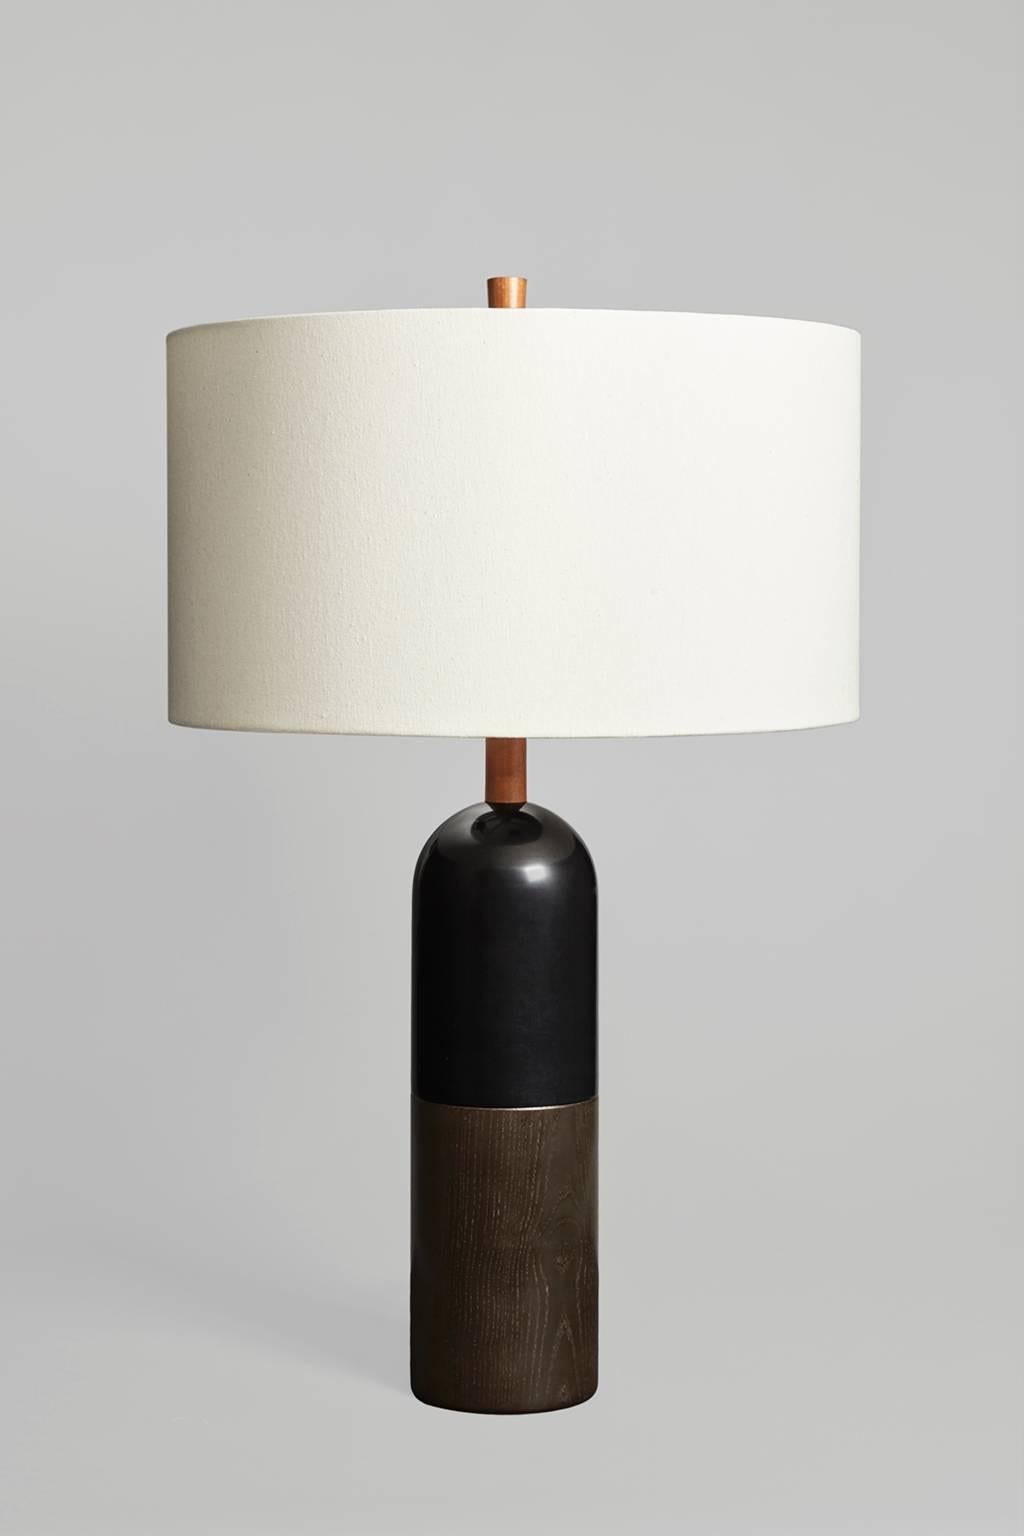 A large table lamp for an open space, the Tusten balances its substantial, geometric form with an expansive shade. The Tusten I has a base of dyed ash and ebonized maple, with cherry neck and finial. Sitting at 33” tall with 20” diameter trim less,